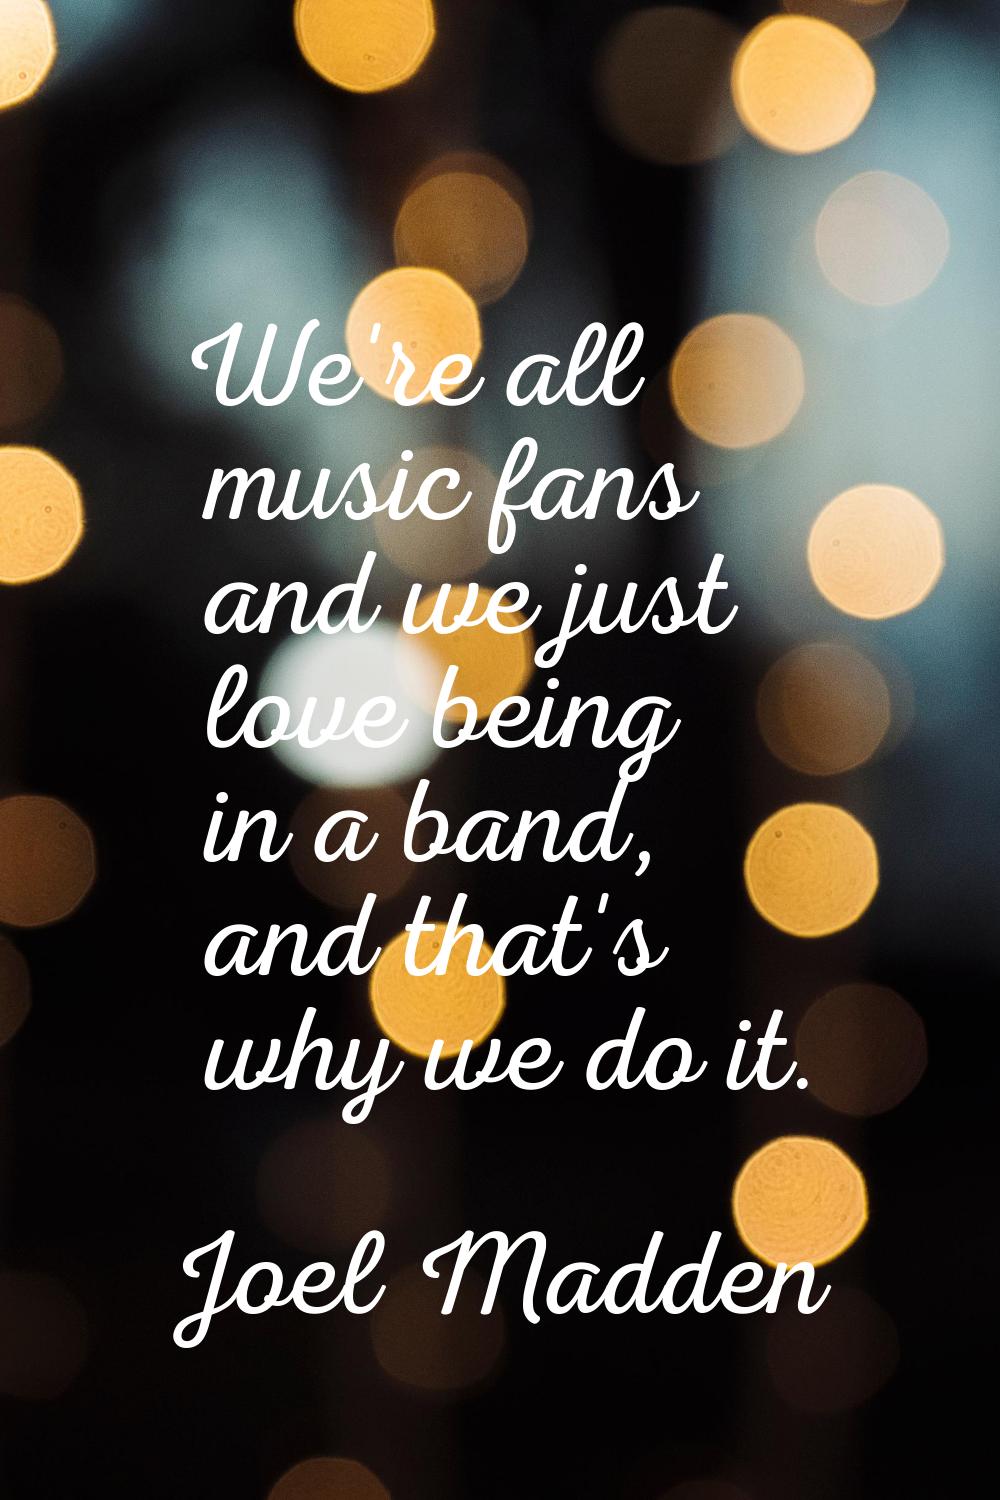 We're all music fans and we just love being in a band, and that's why we do it.